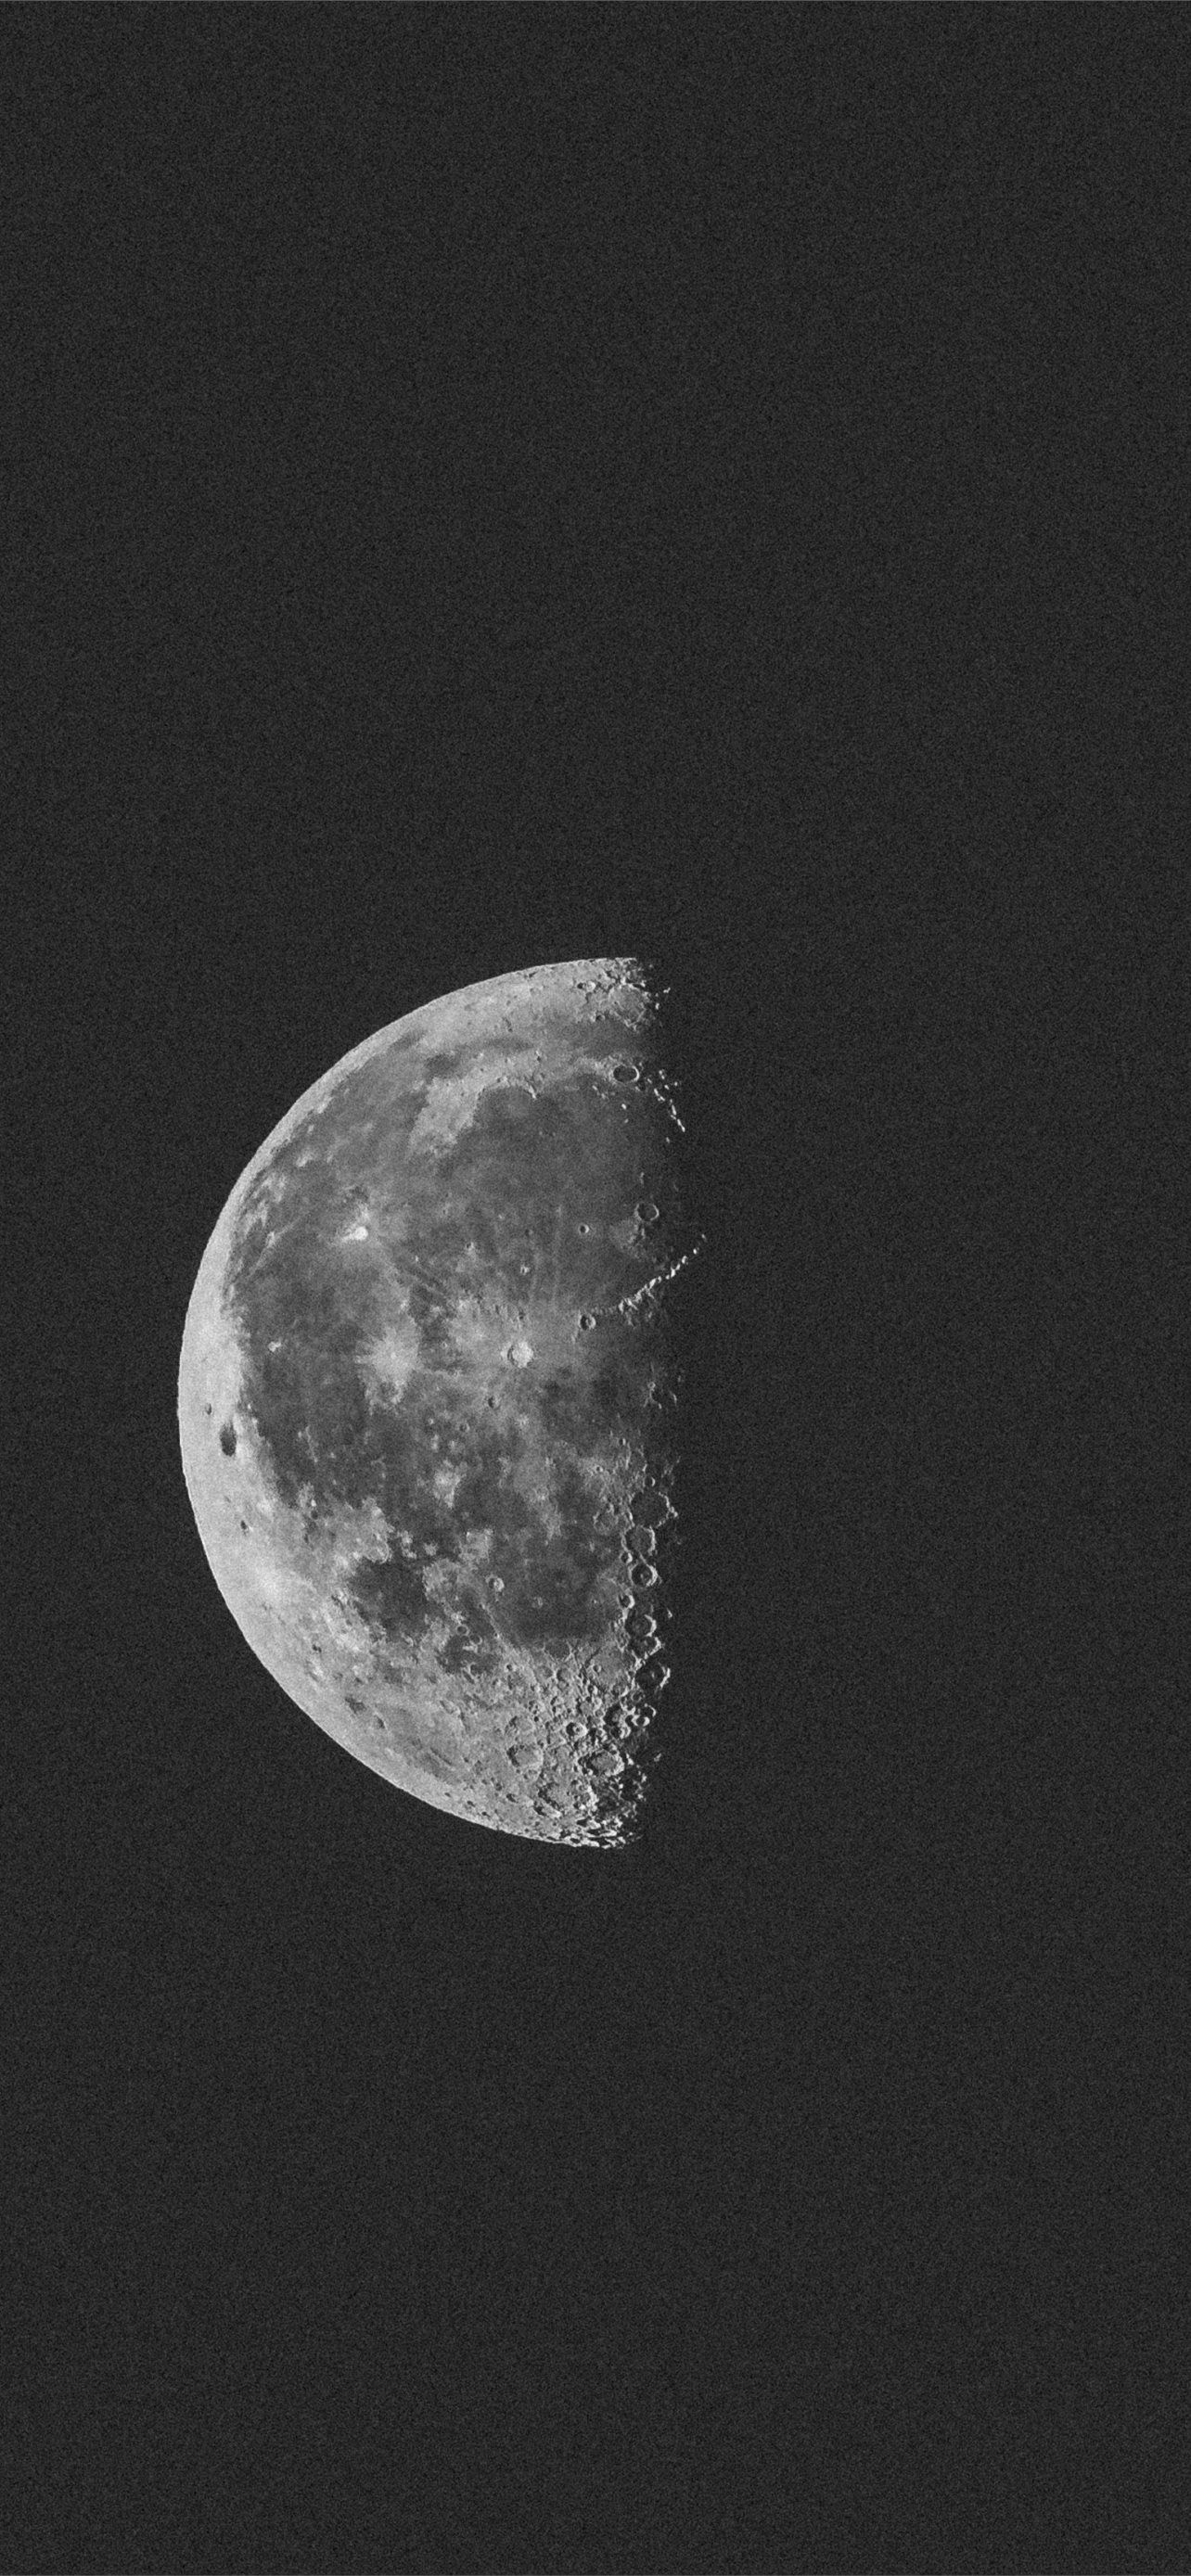 A black and white photo of the moon - Moon